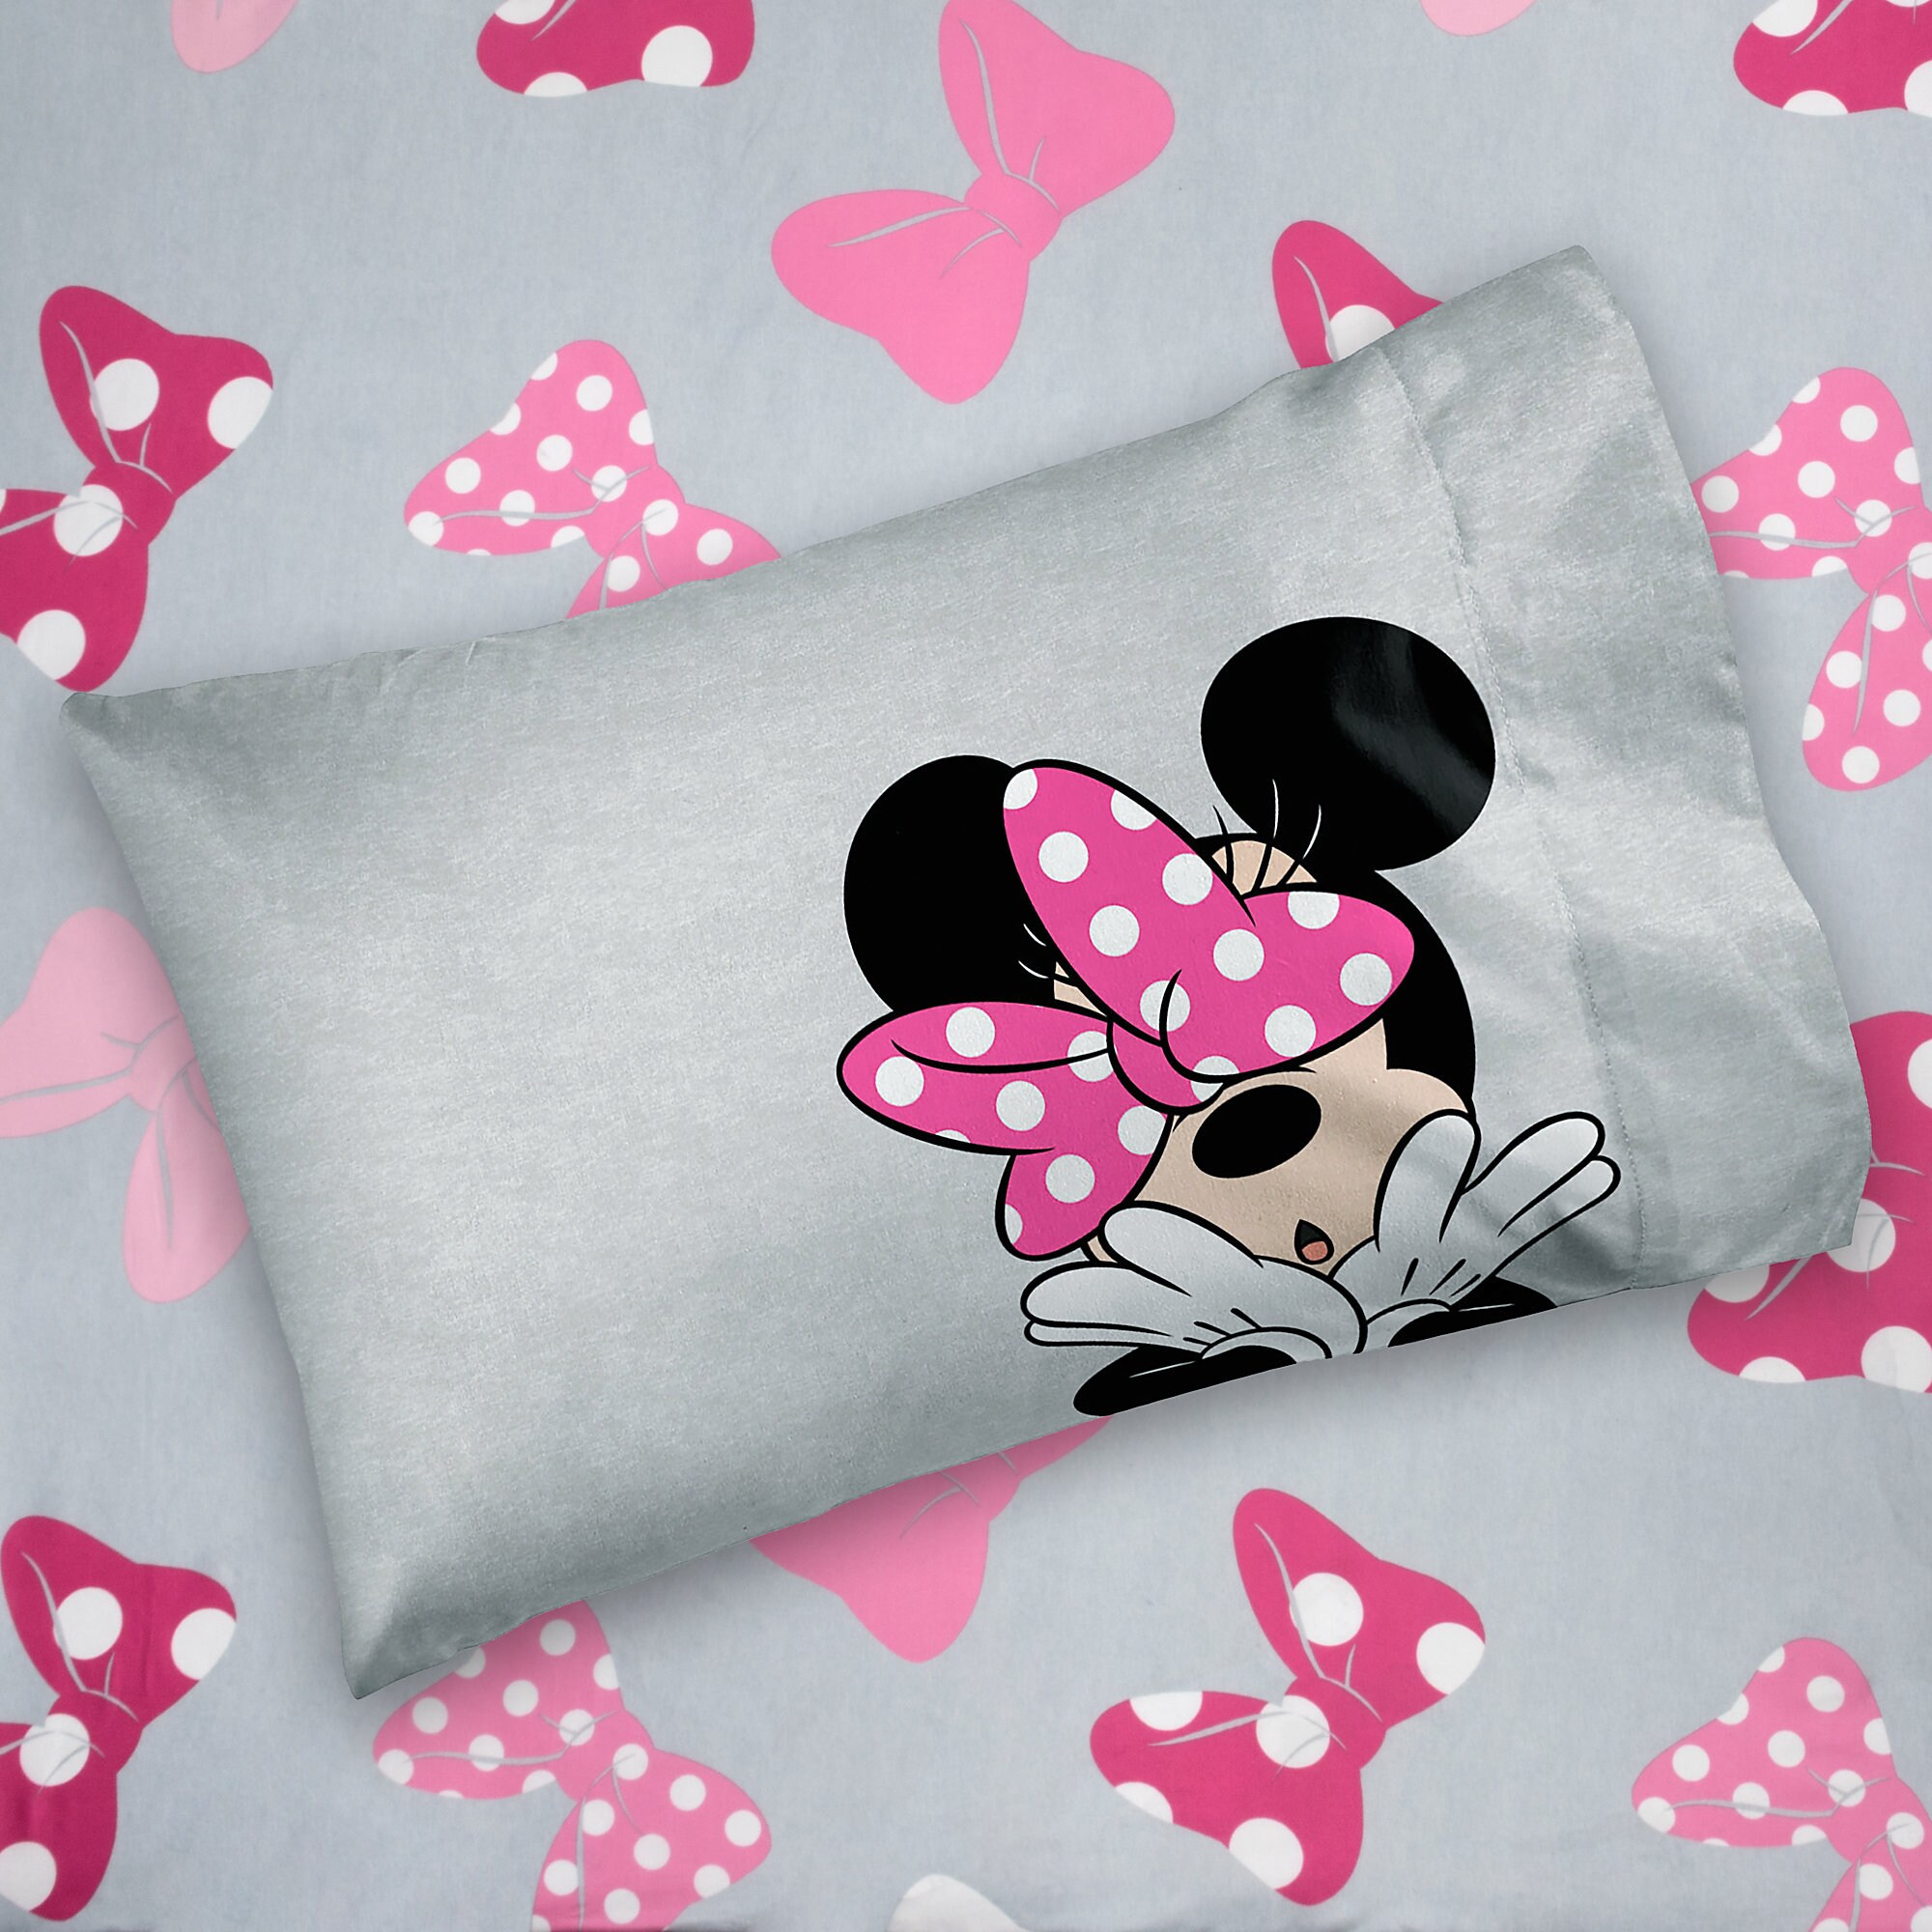 Minnie Mouse Bow Sheet Set - Twin / Full